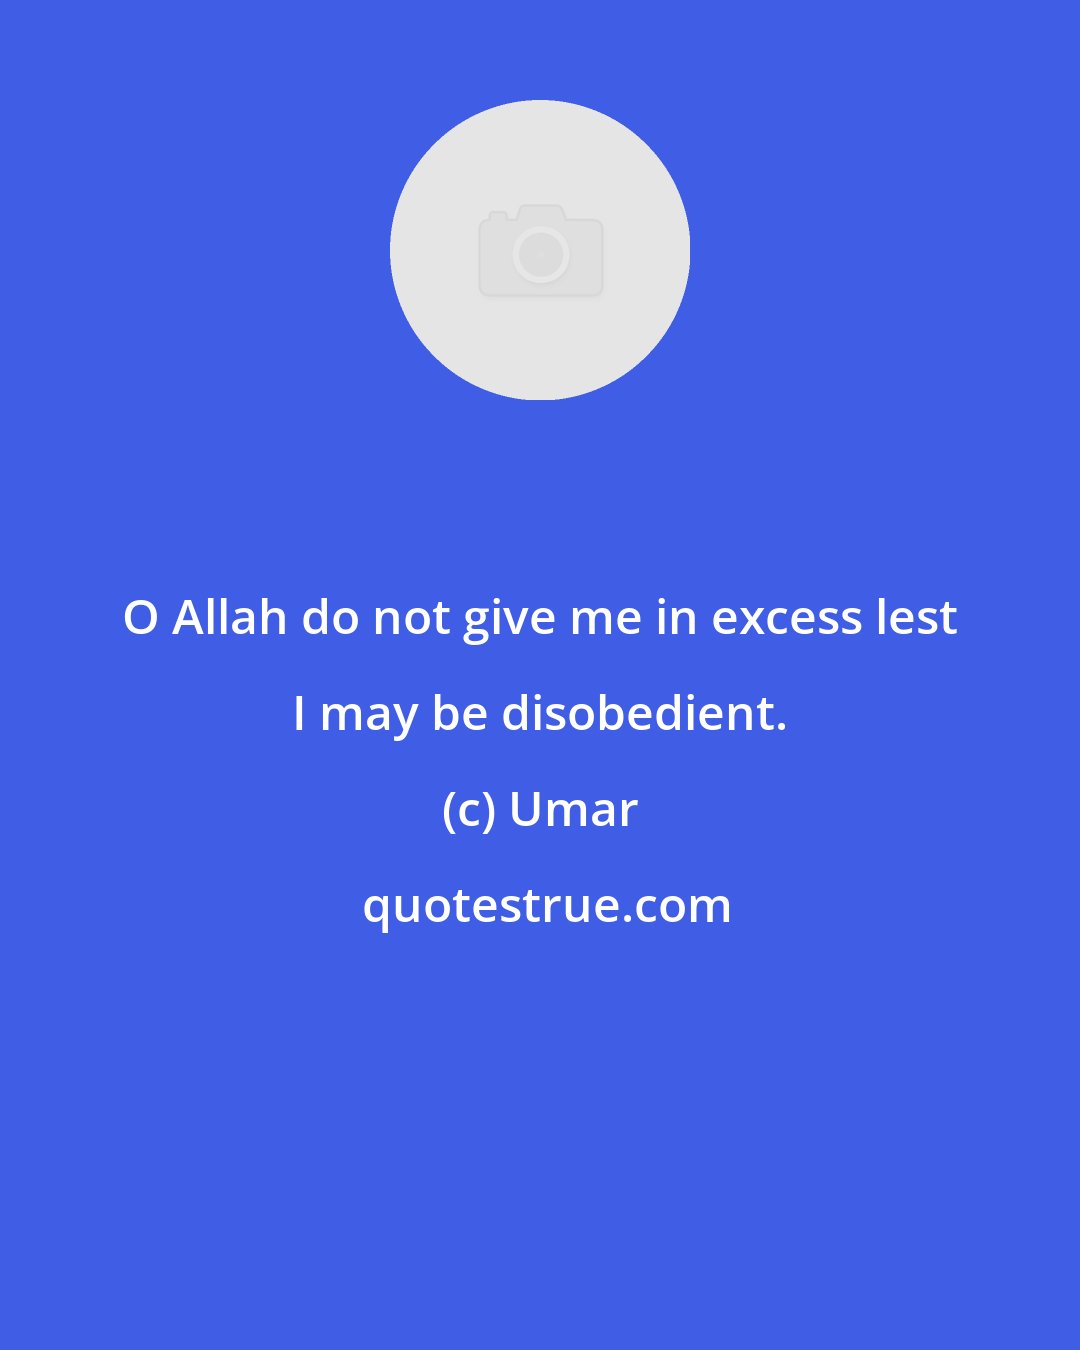 Umar: O Allah do not give me in excess lest I may be disobedient.